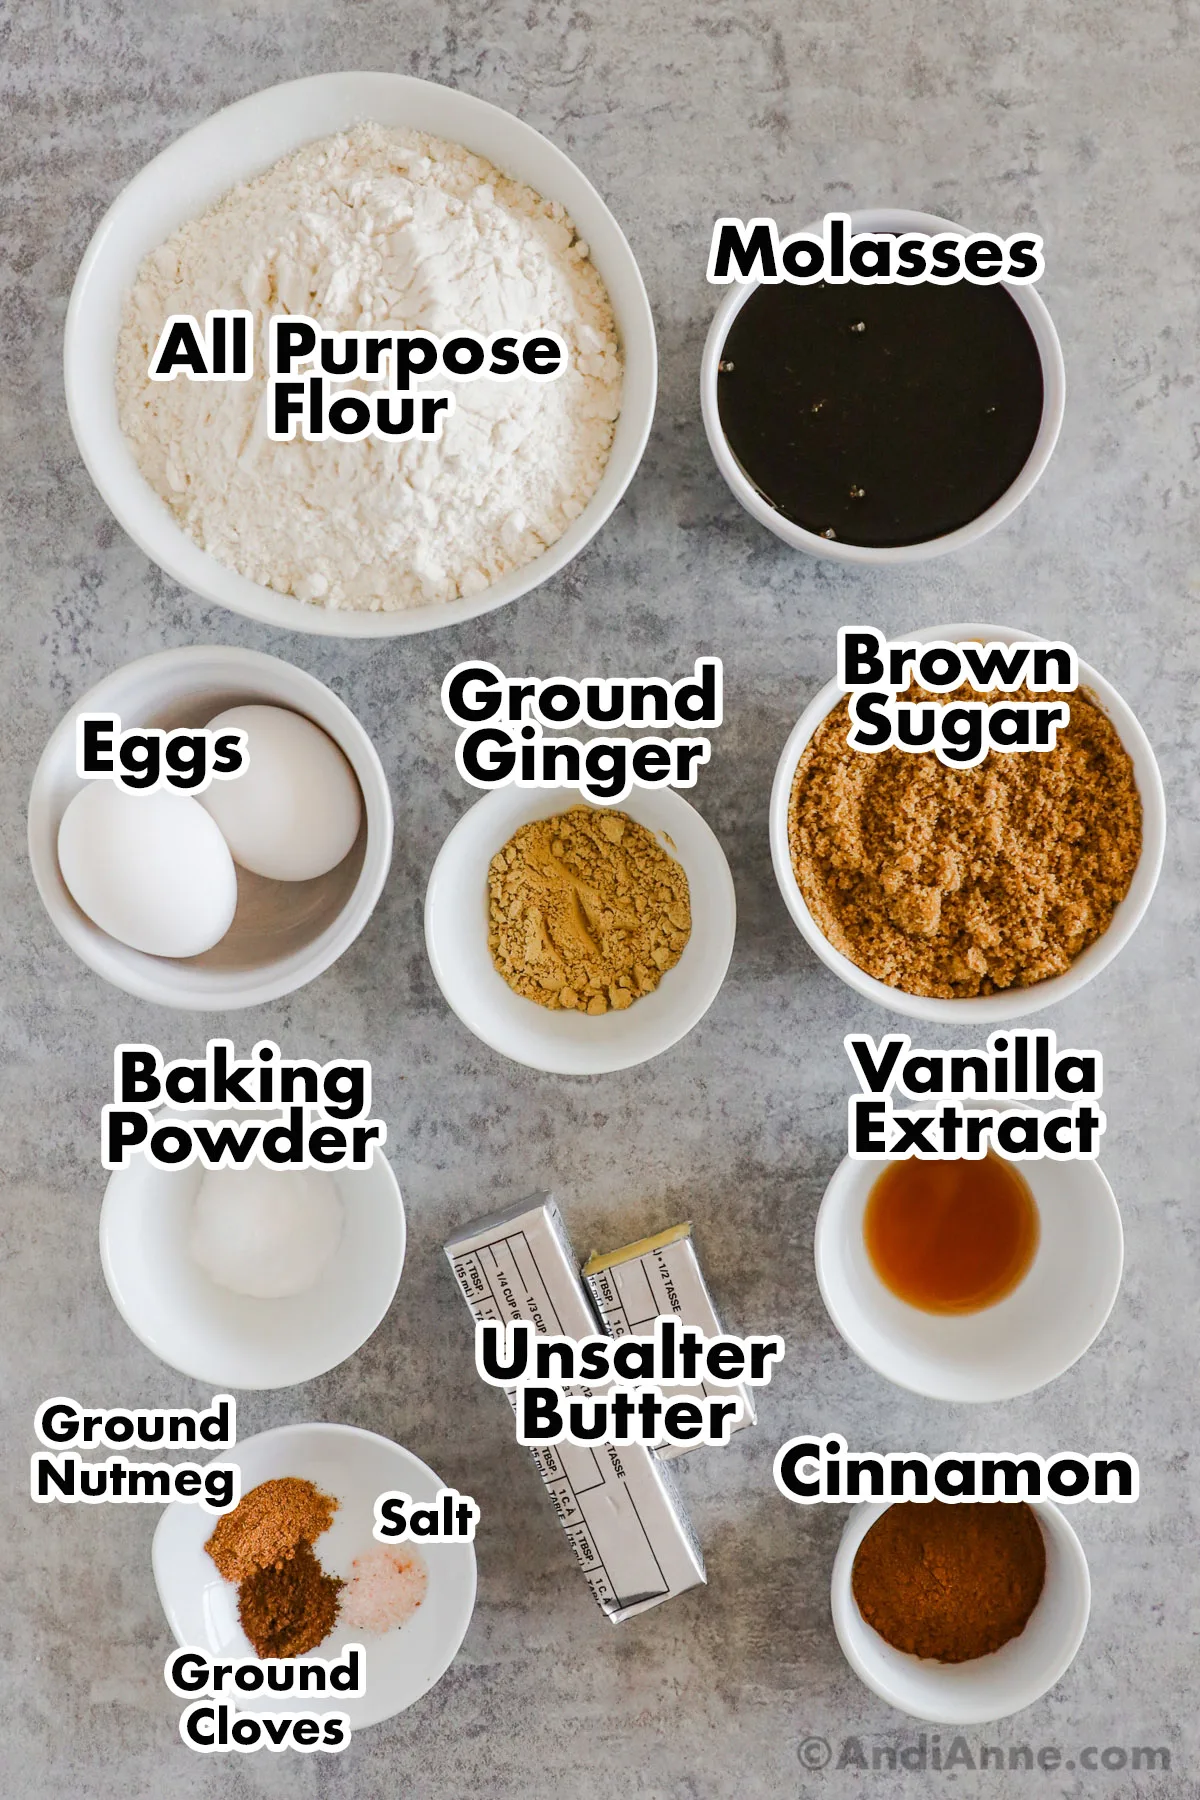 Bowls of recipe ingredients including flour, molasses, brown sugar, ground ginger, eggs, baking powder, vanilla extract, spices and butter.